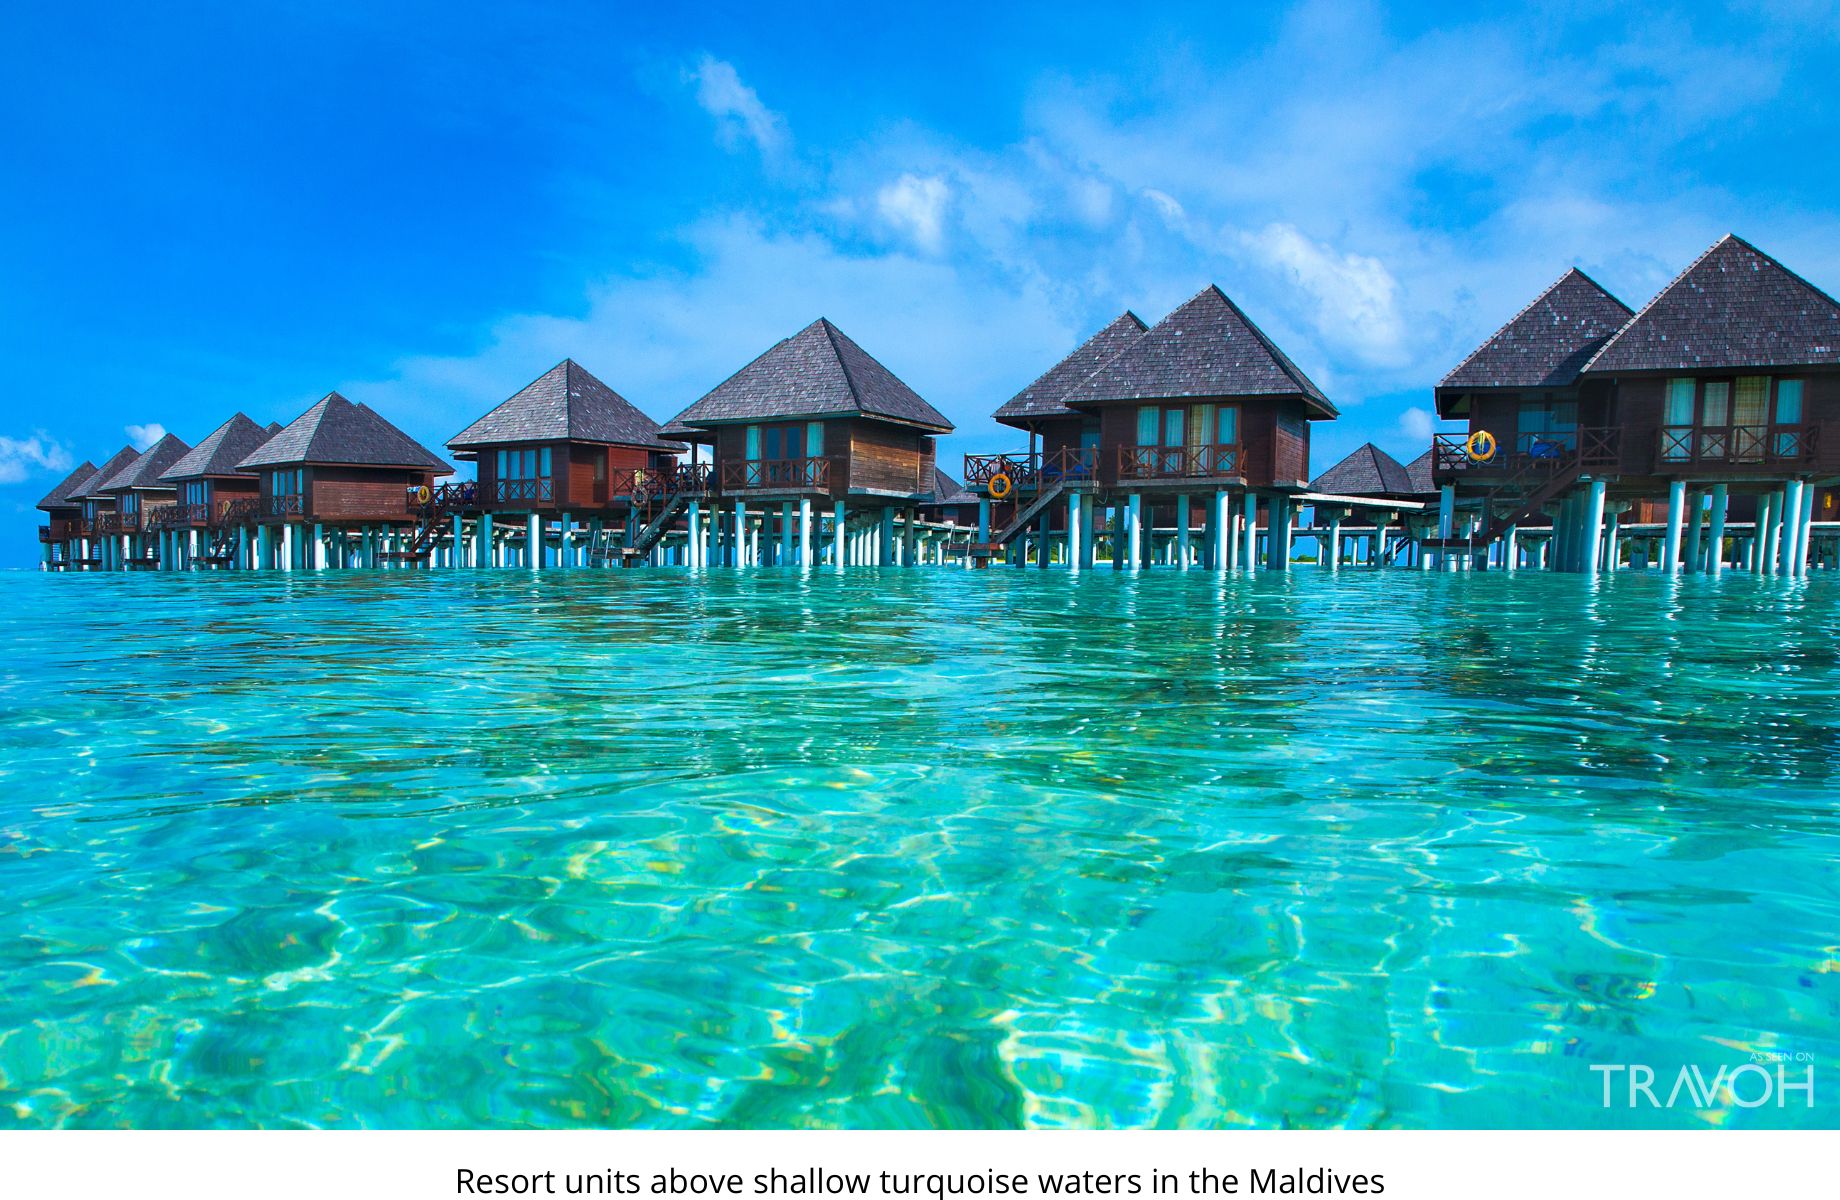 Resort units above shallow turquoise waters in the Maldives – TRAVOH